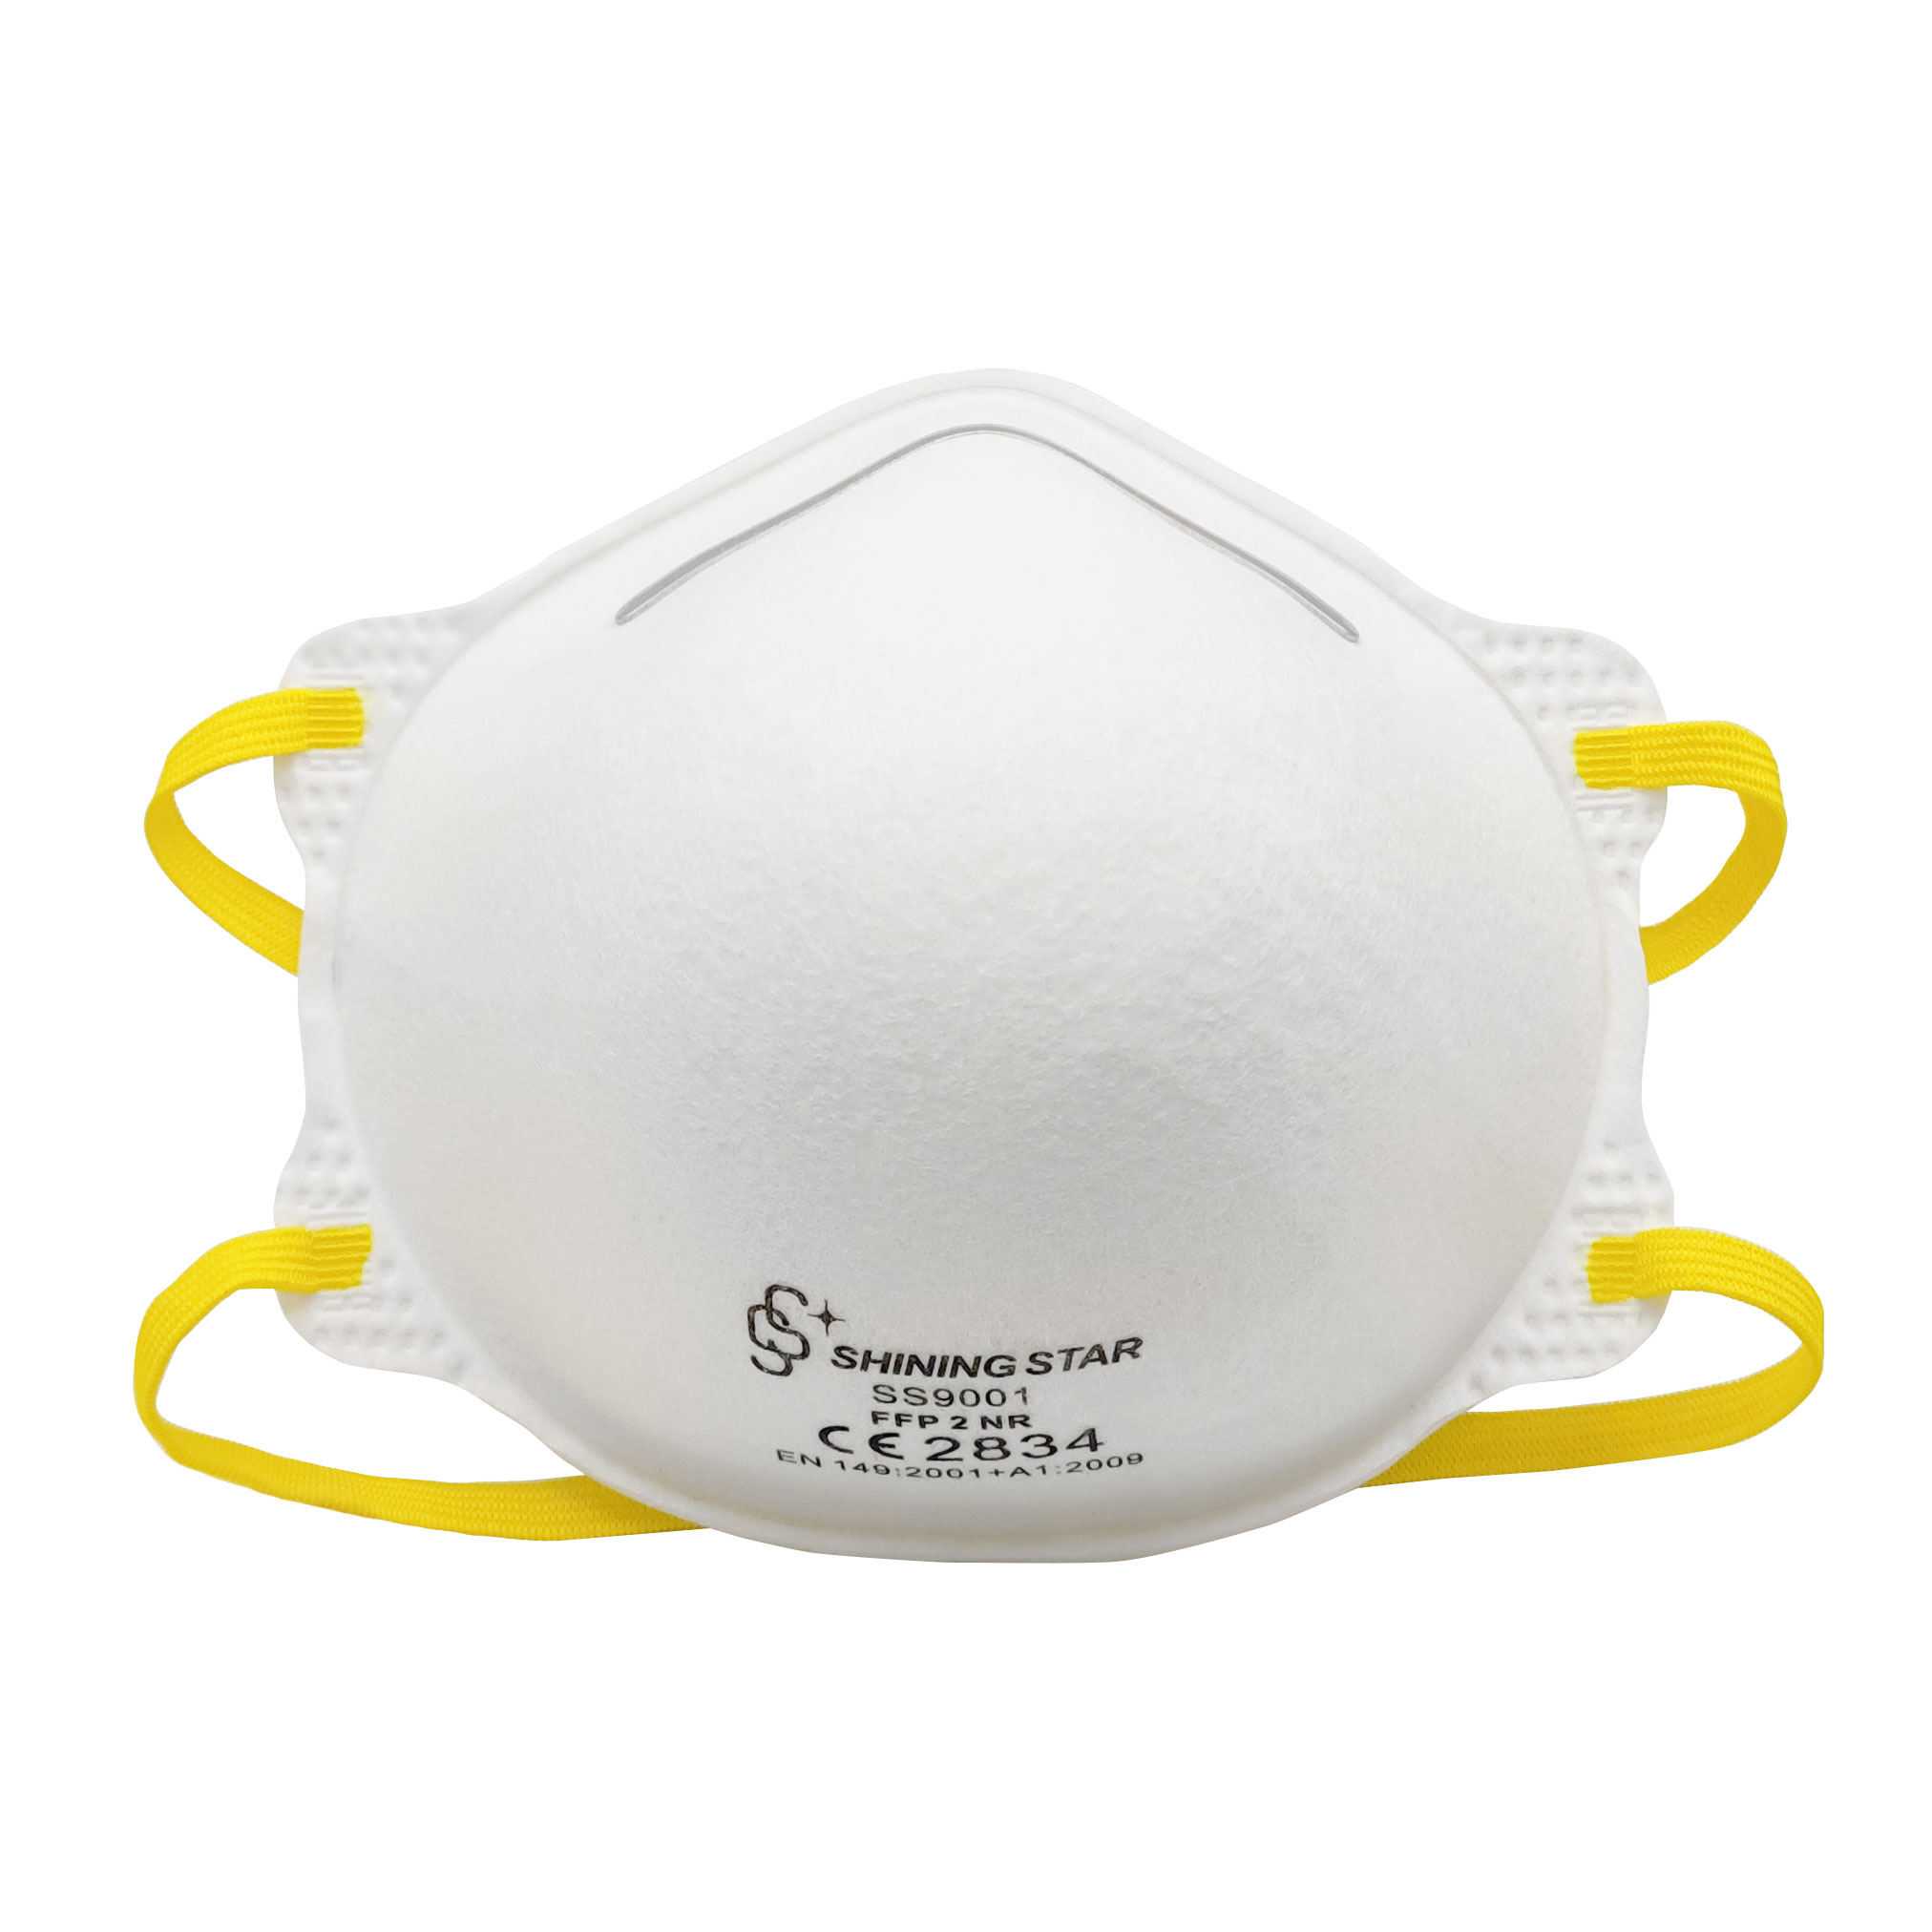 SS9001-FFP2 Disposable Particulate Respirator Featured Image